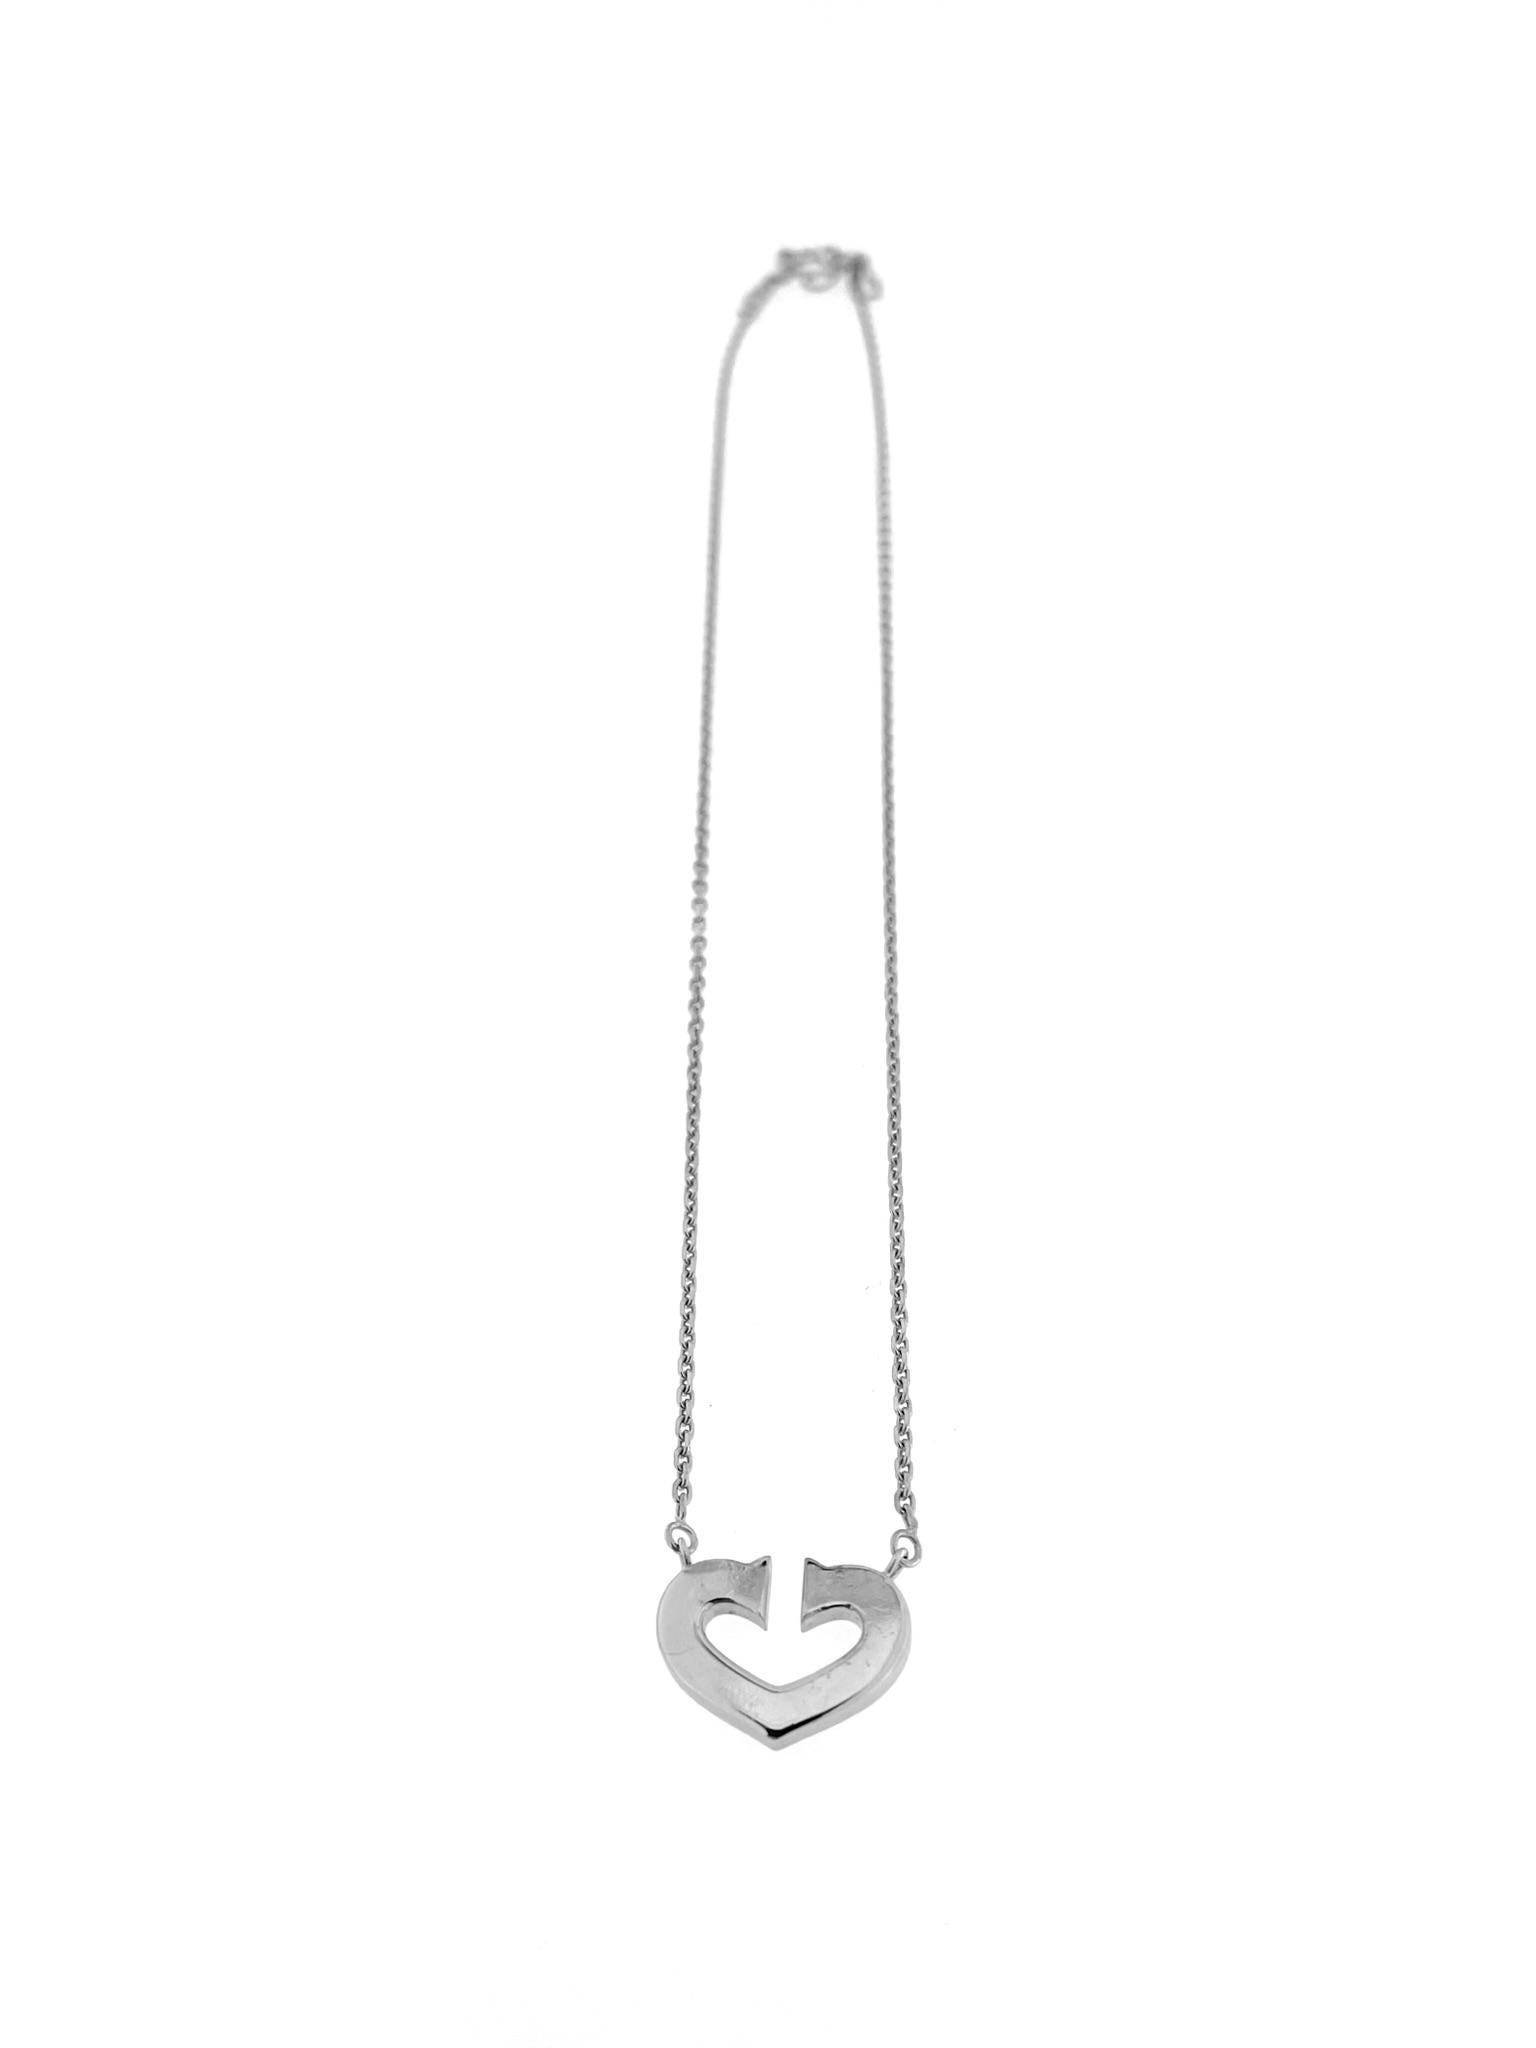 The Cartier C Collection Necklace in 18-karat white gold is a sophisticated and contemporary piece of jewelry crafted by Cartier, a renowned French luxury brand. The 